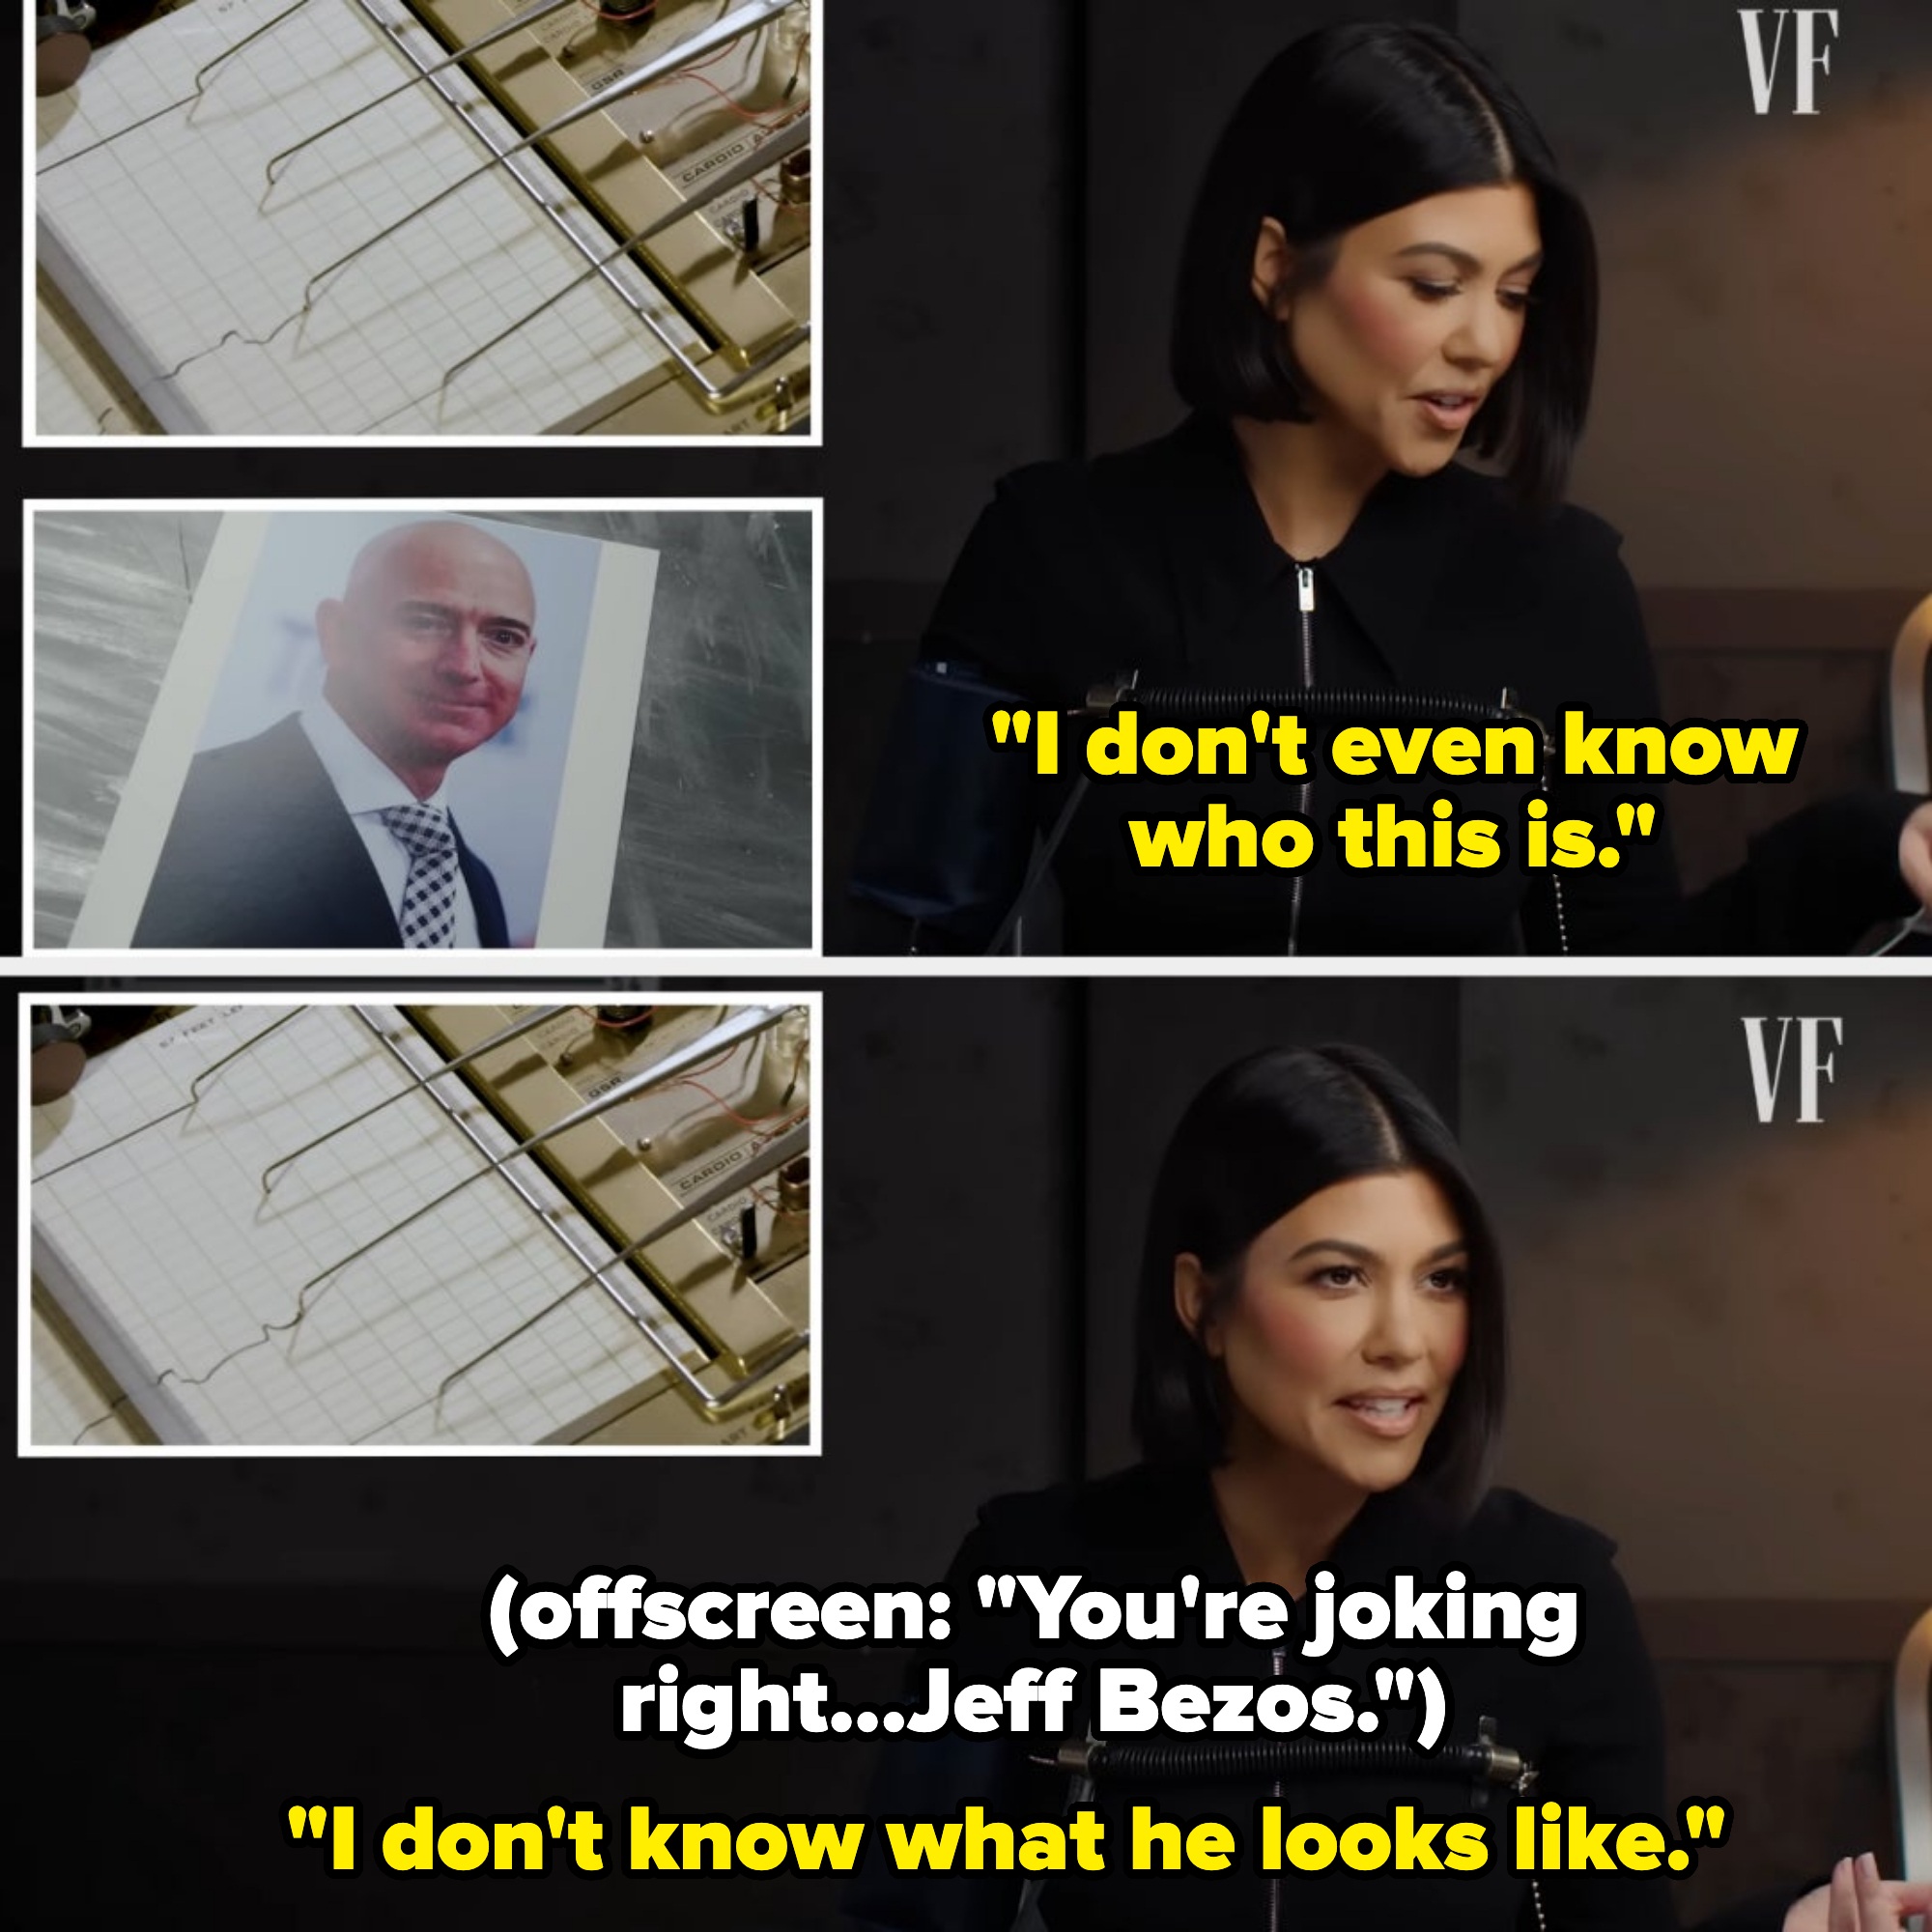 Kourtney looks at a picture of Jeff Bezos and says she doesn&#x27;t know who this is and then khloe says it&#x27;s jeff bezos and kourtney says she doesn&#x27;t know what he looks like